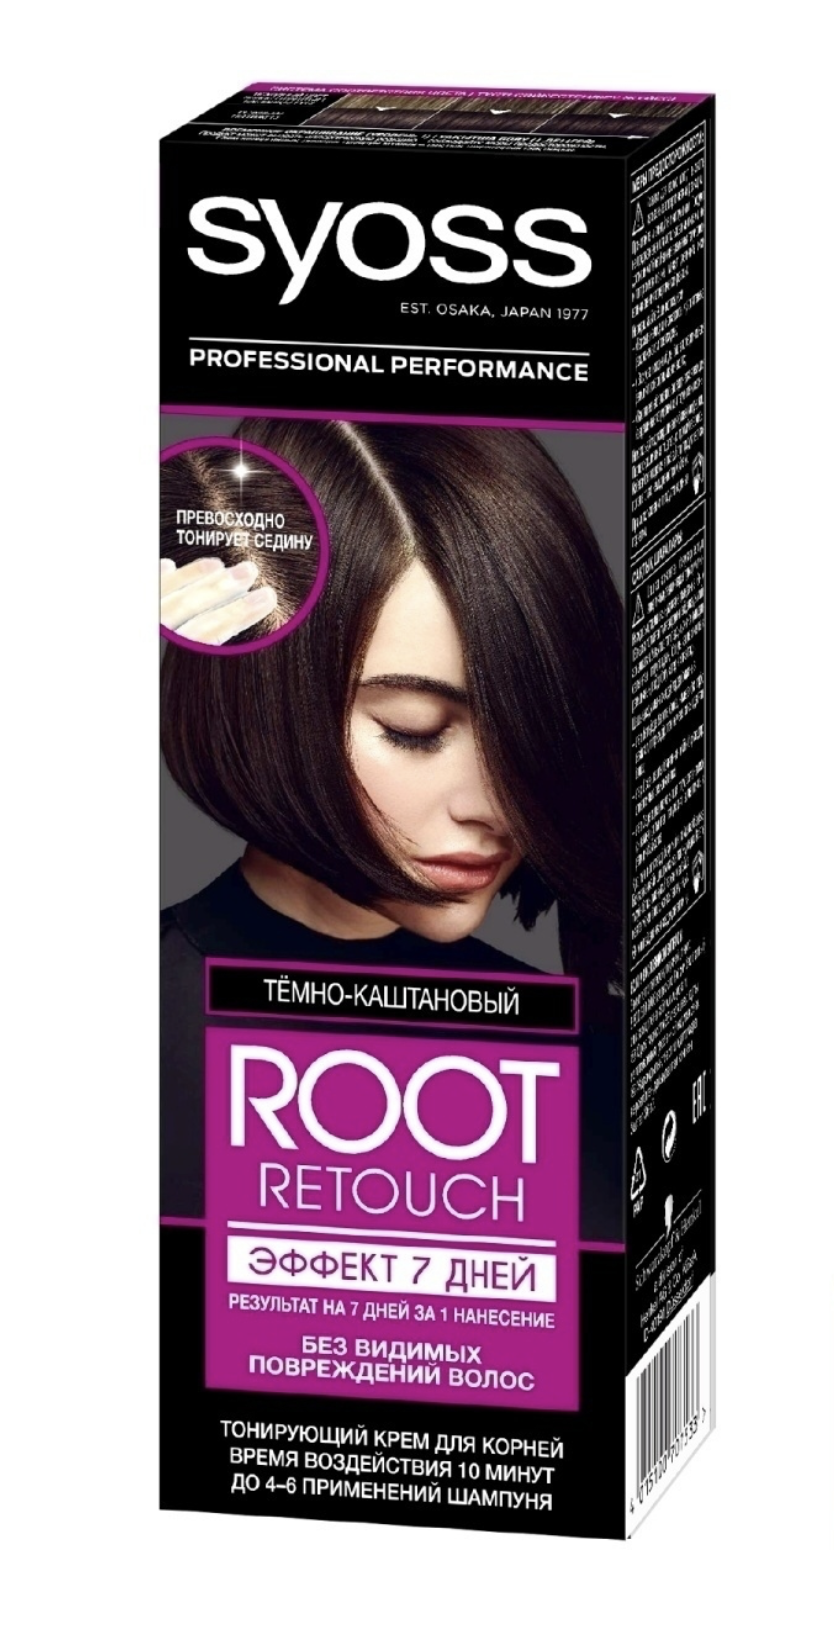   / Syoss Root Retouch - -    - 60 